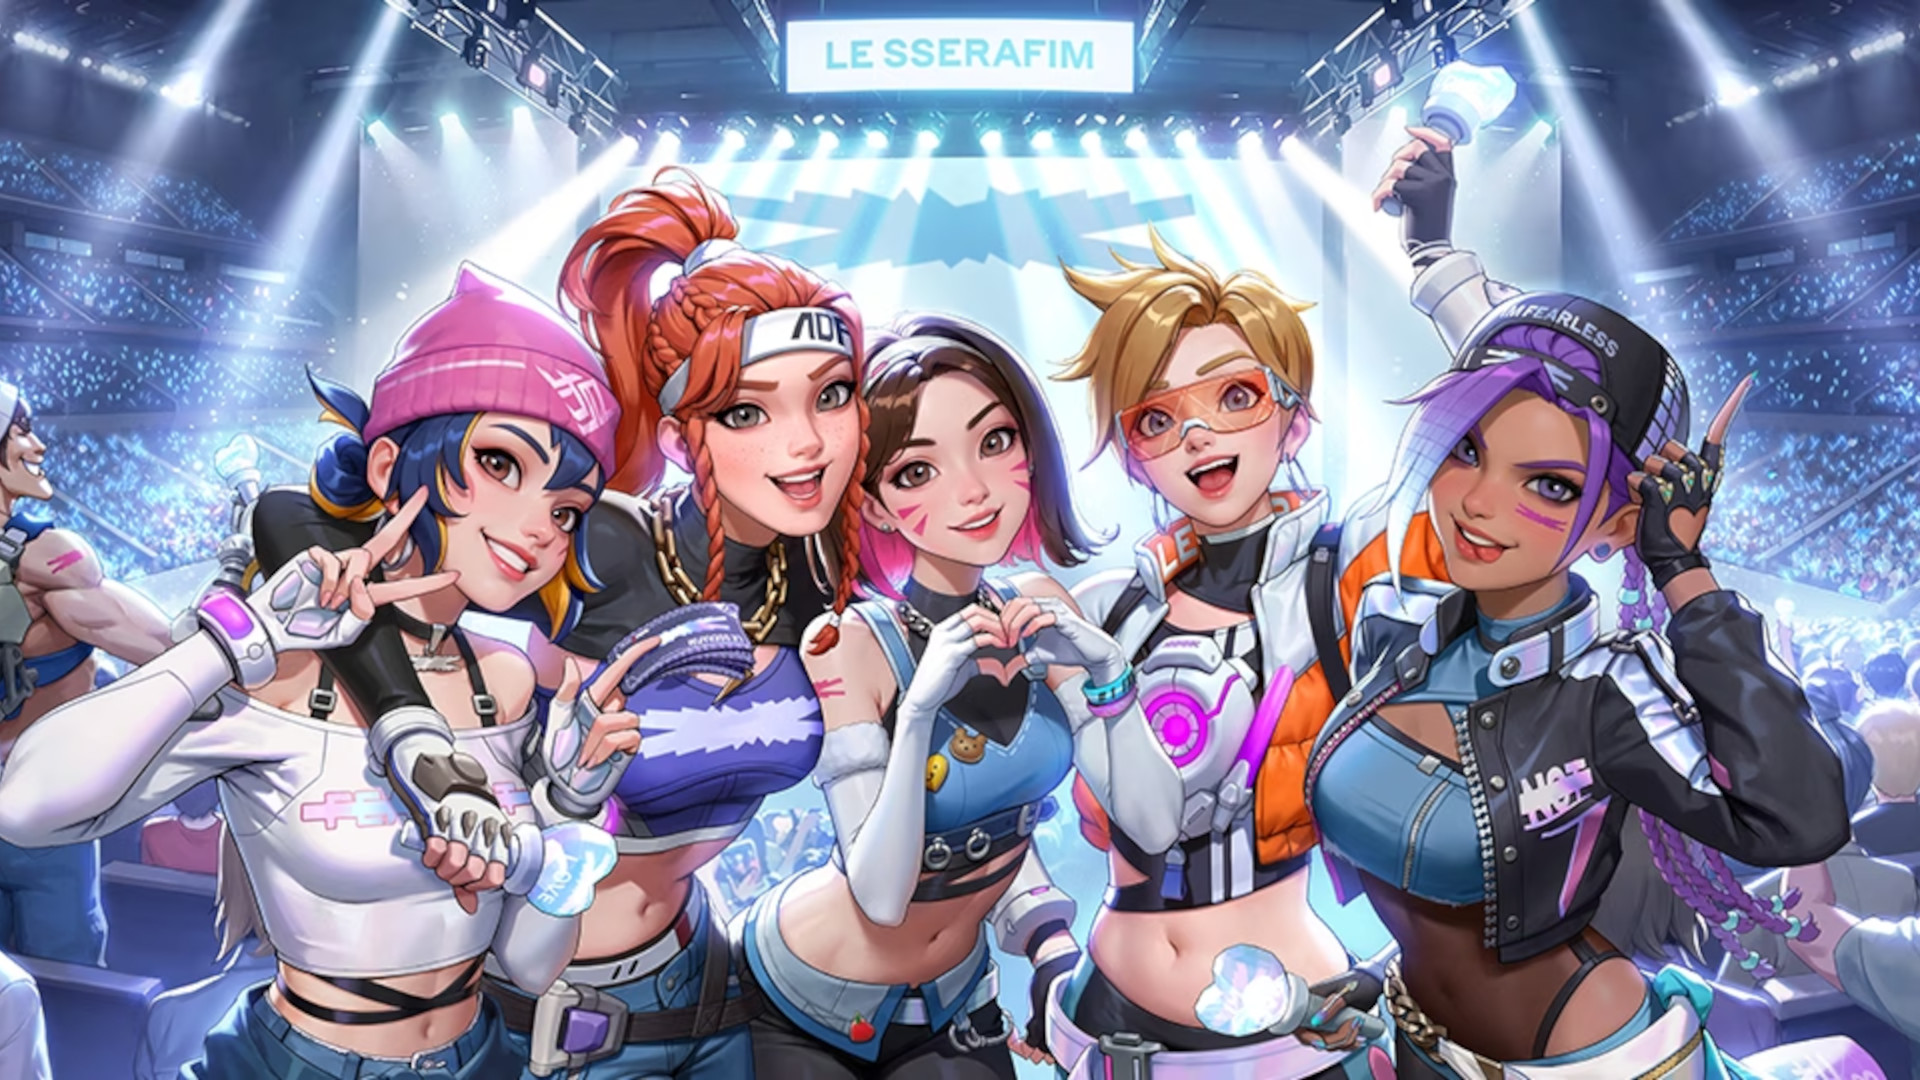 Overwatch 2 characters dressed in LE SSERAFIM outfits